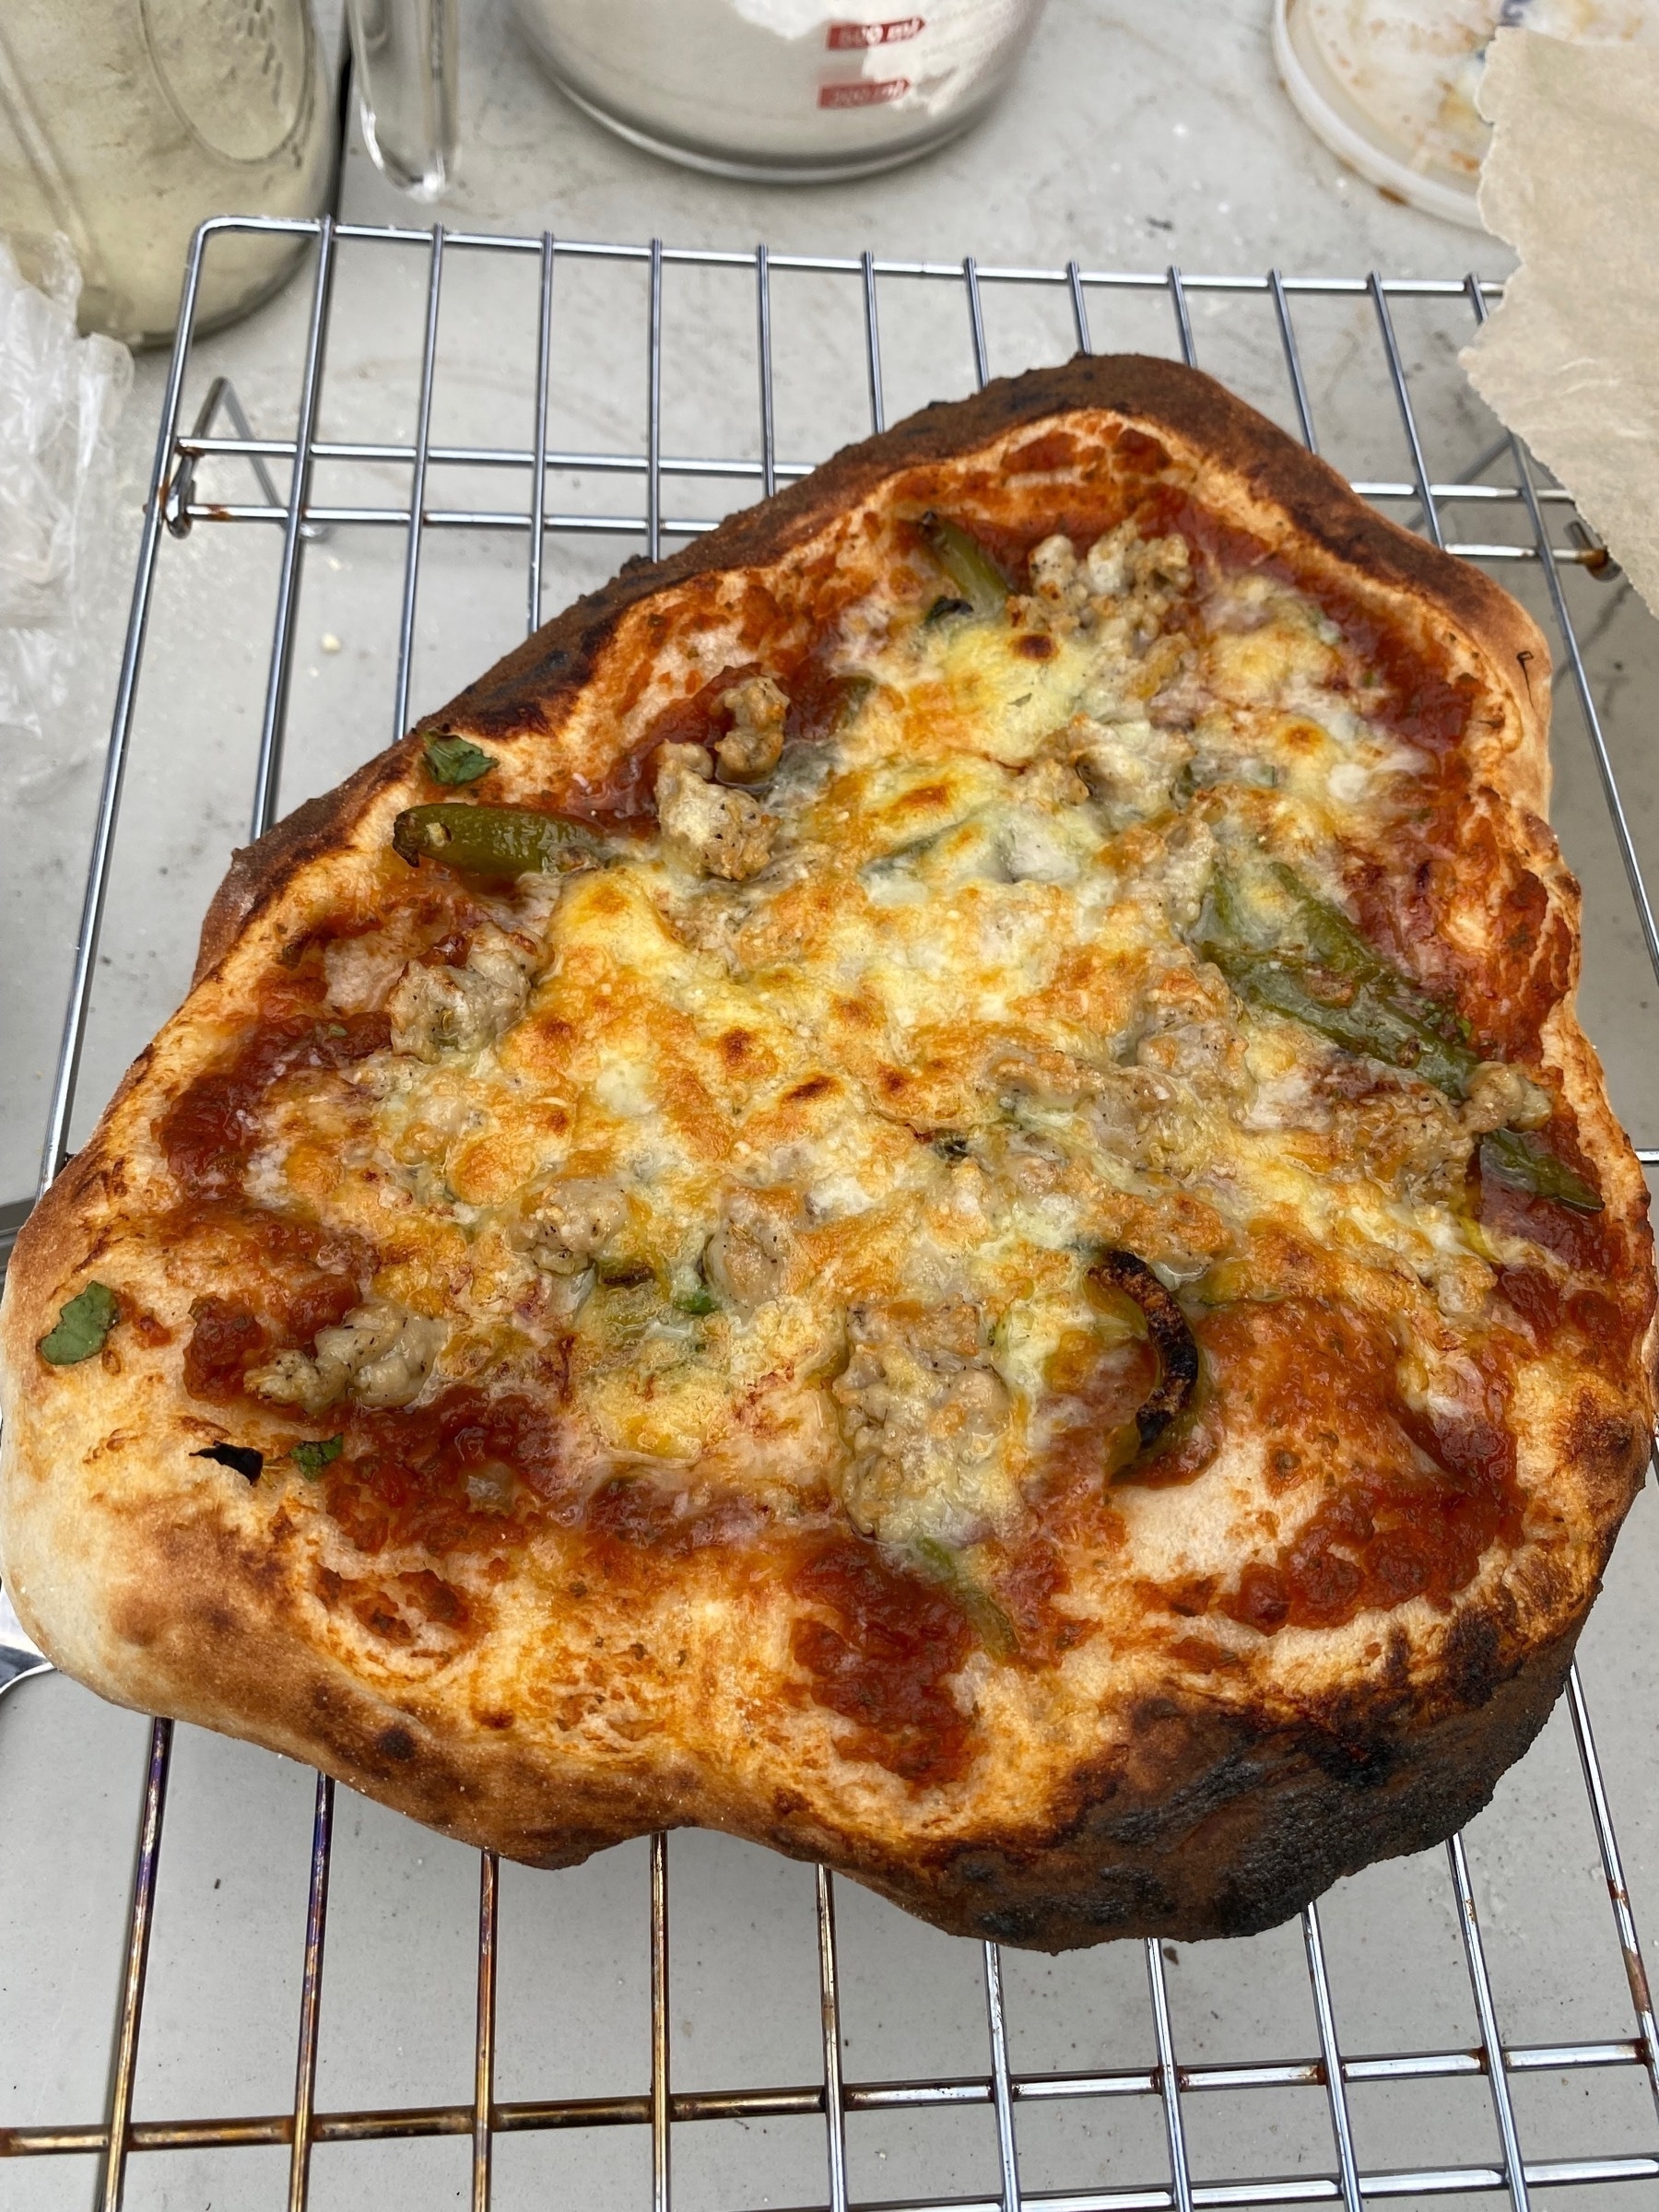 A small pizza on a cooling rack, not quite round.